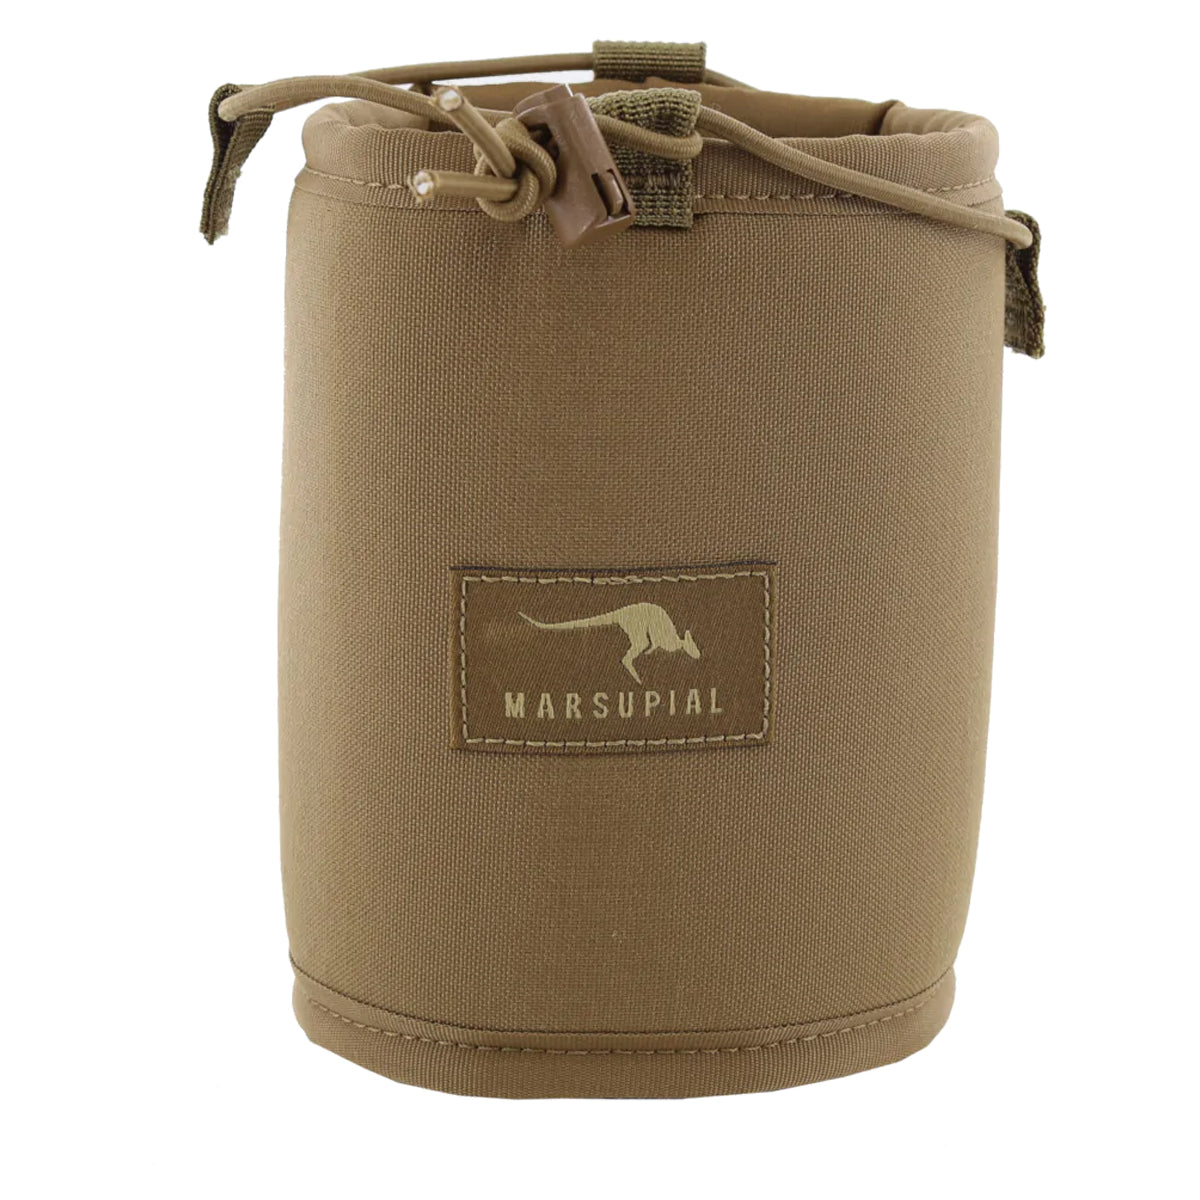 Marsupial Gear Water Bottle Pouch in Coyote by GOHUNT | Marsupial Gear - GOHUNT Shop